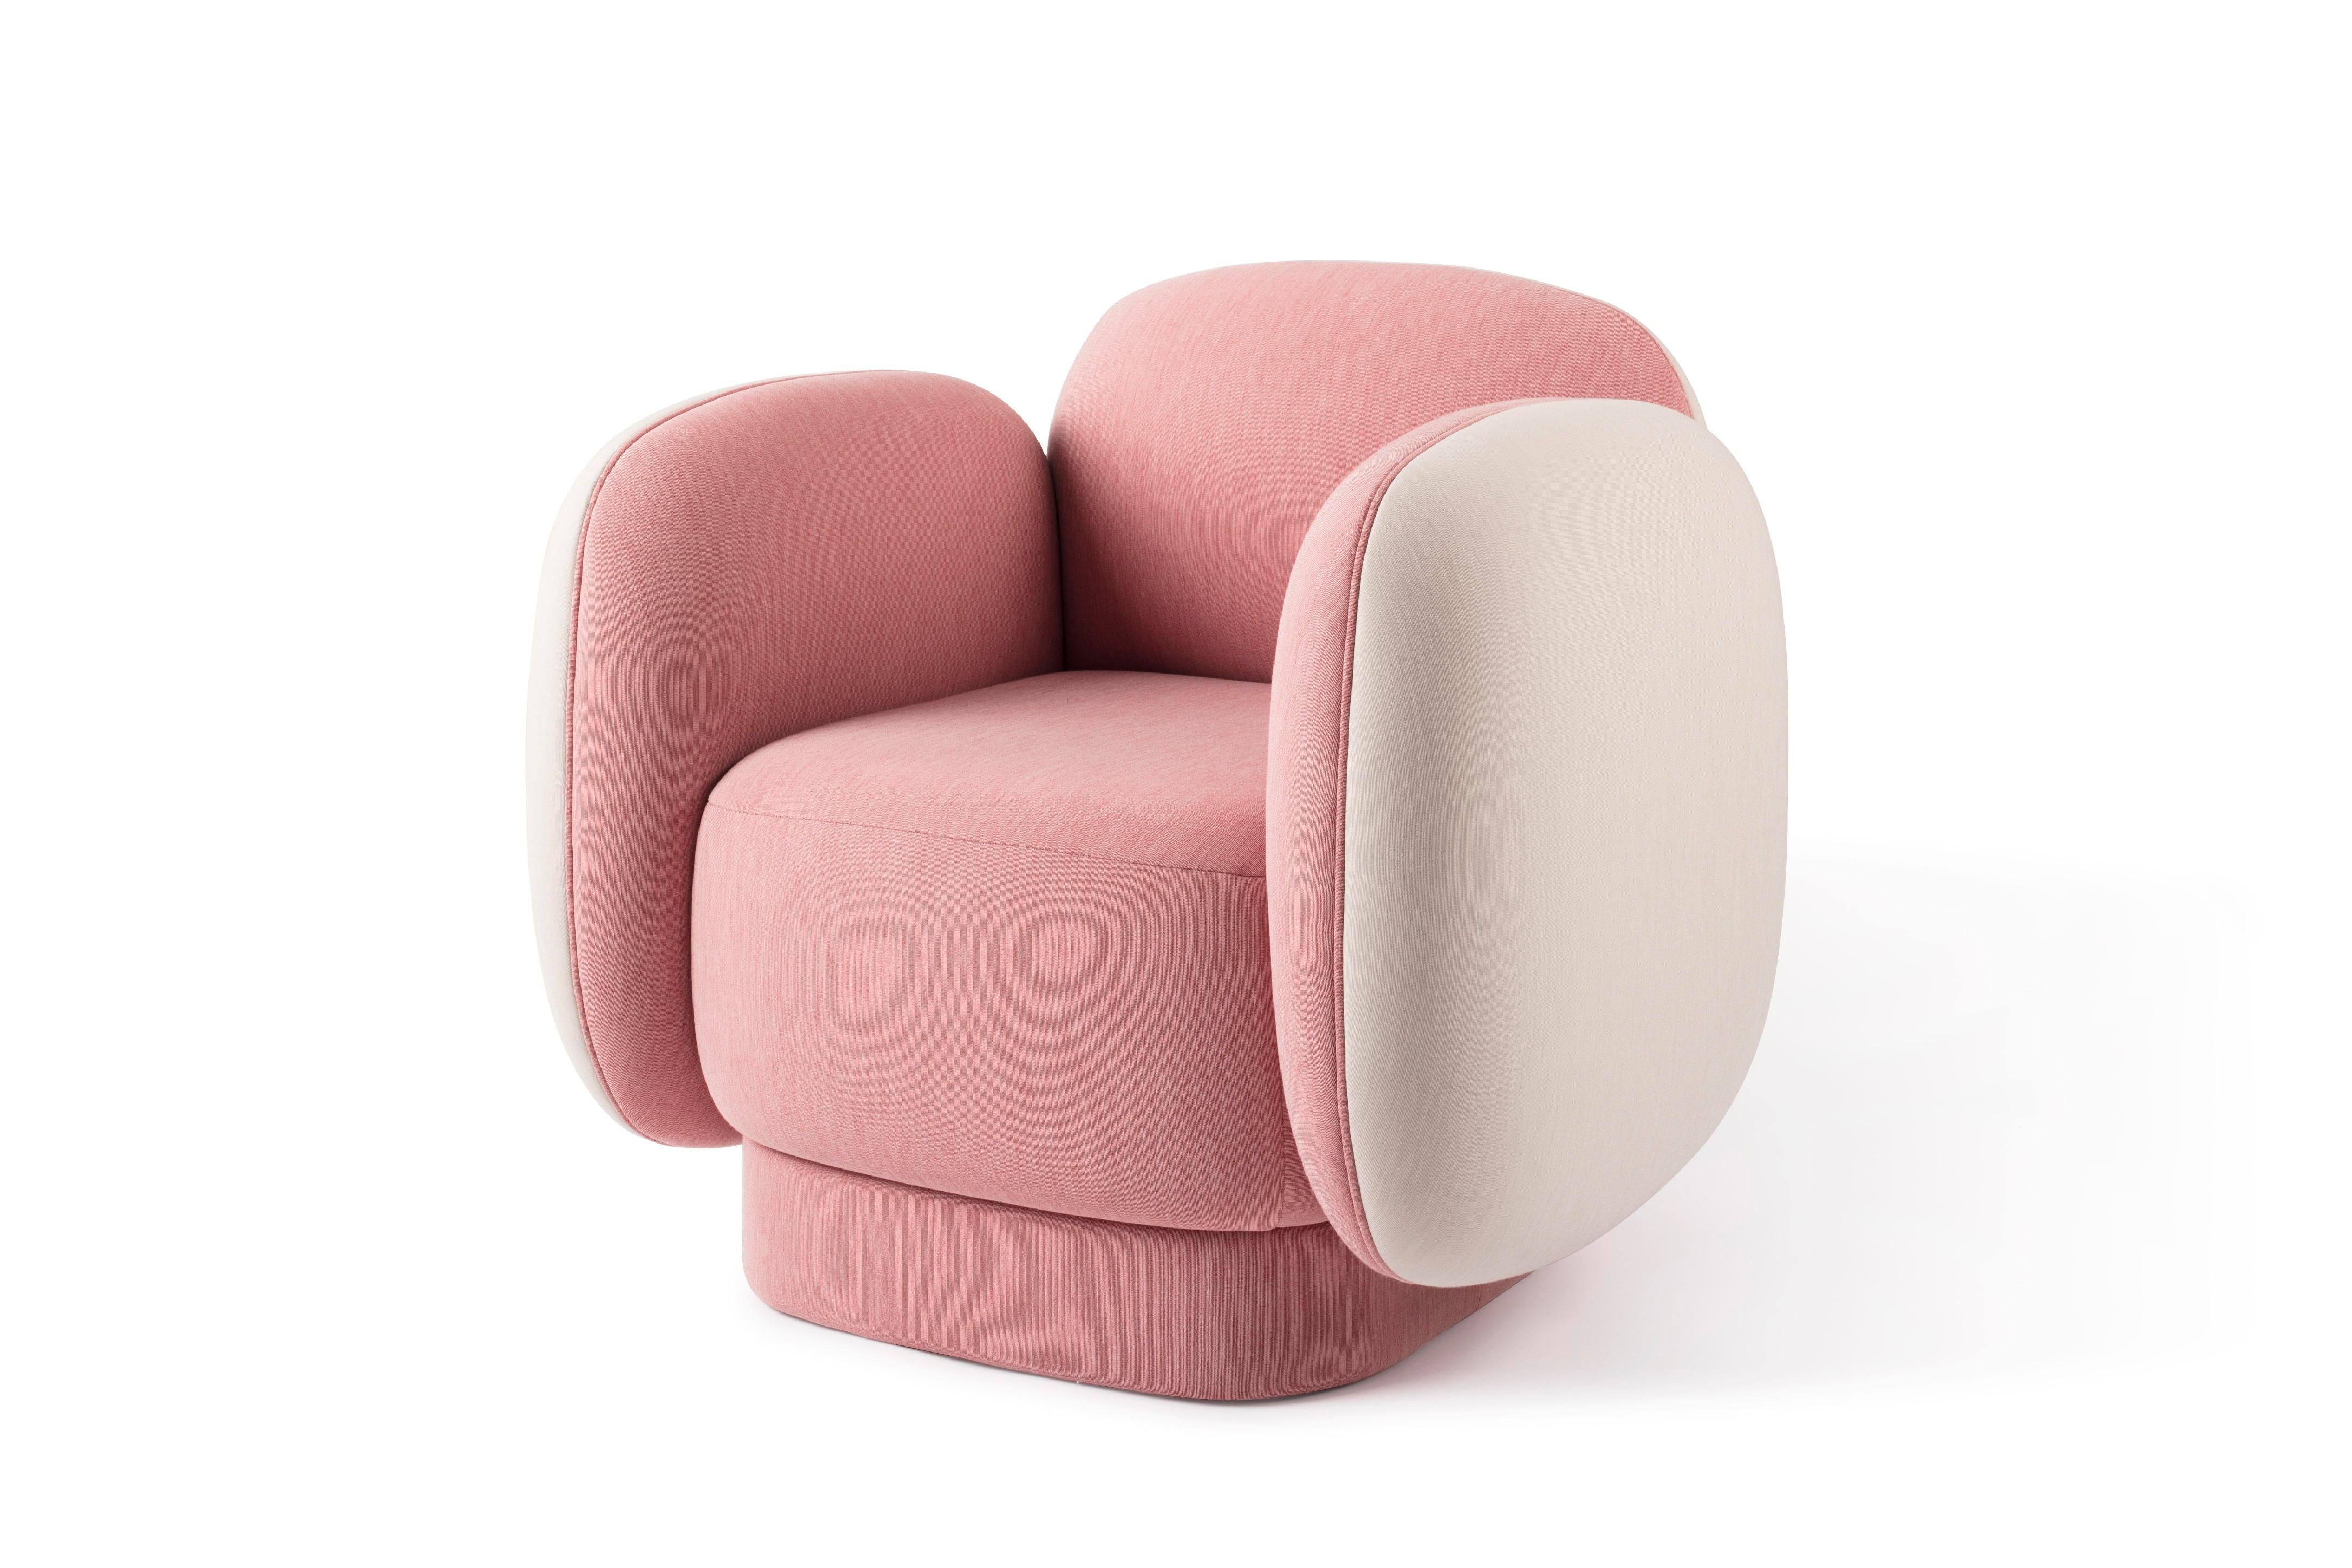 Space oddity designed by Thomas Dariel, Maison Dada
Armchair: L100 x D91 x H90 cm
Structure in solid timber and plywood • Memory foam
Base and seating fully upholstered in fabric
Recommended fabric • Febrik Uniform Melange Collection from